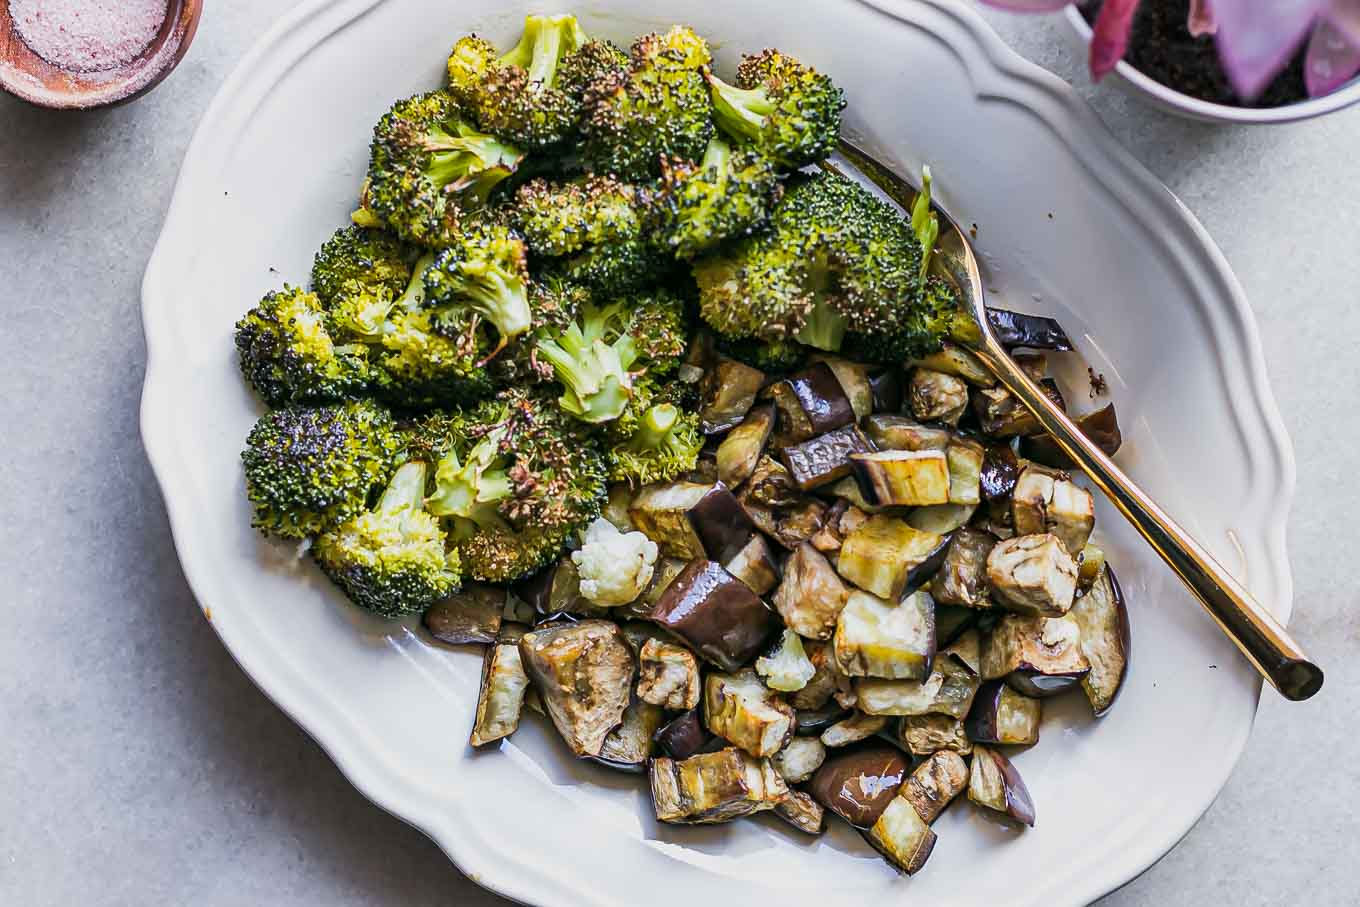 a baked broccoli and eggplant side dish on a white table